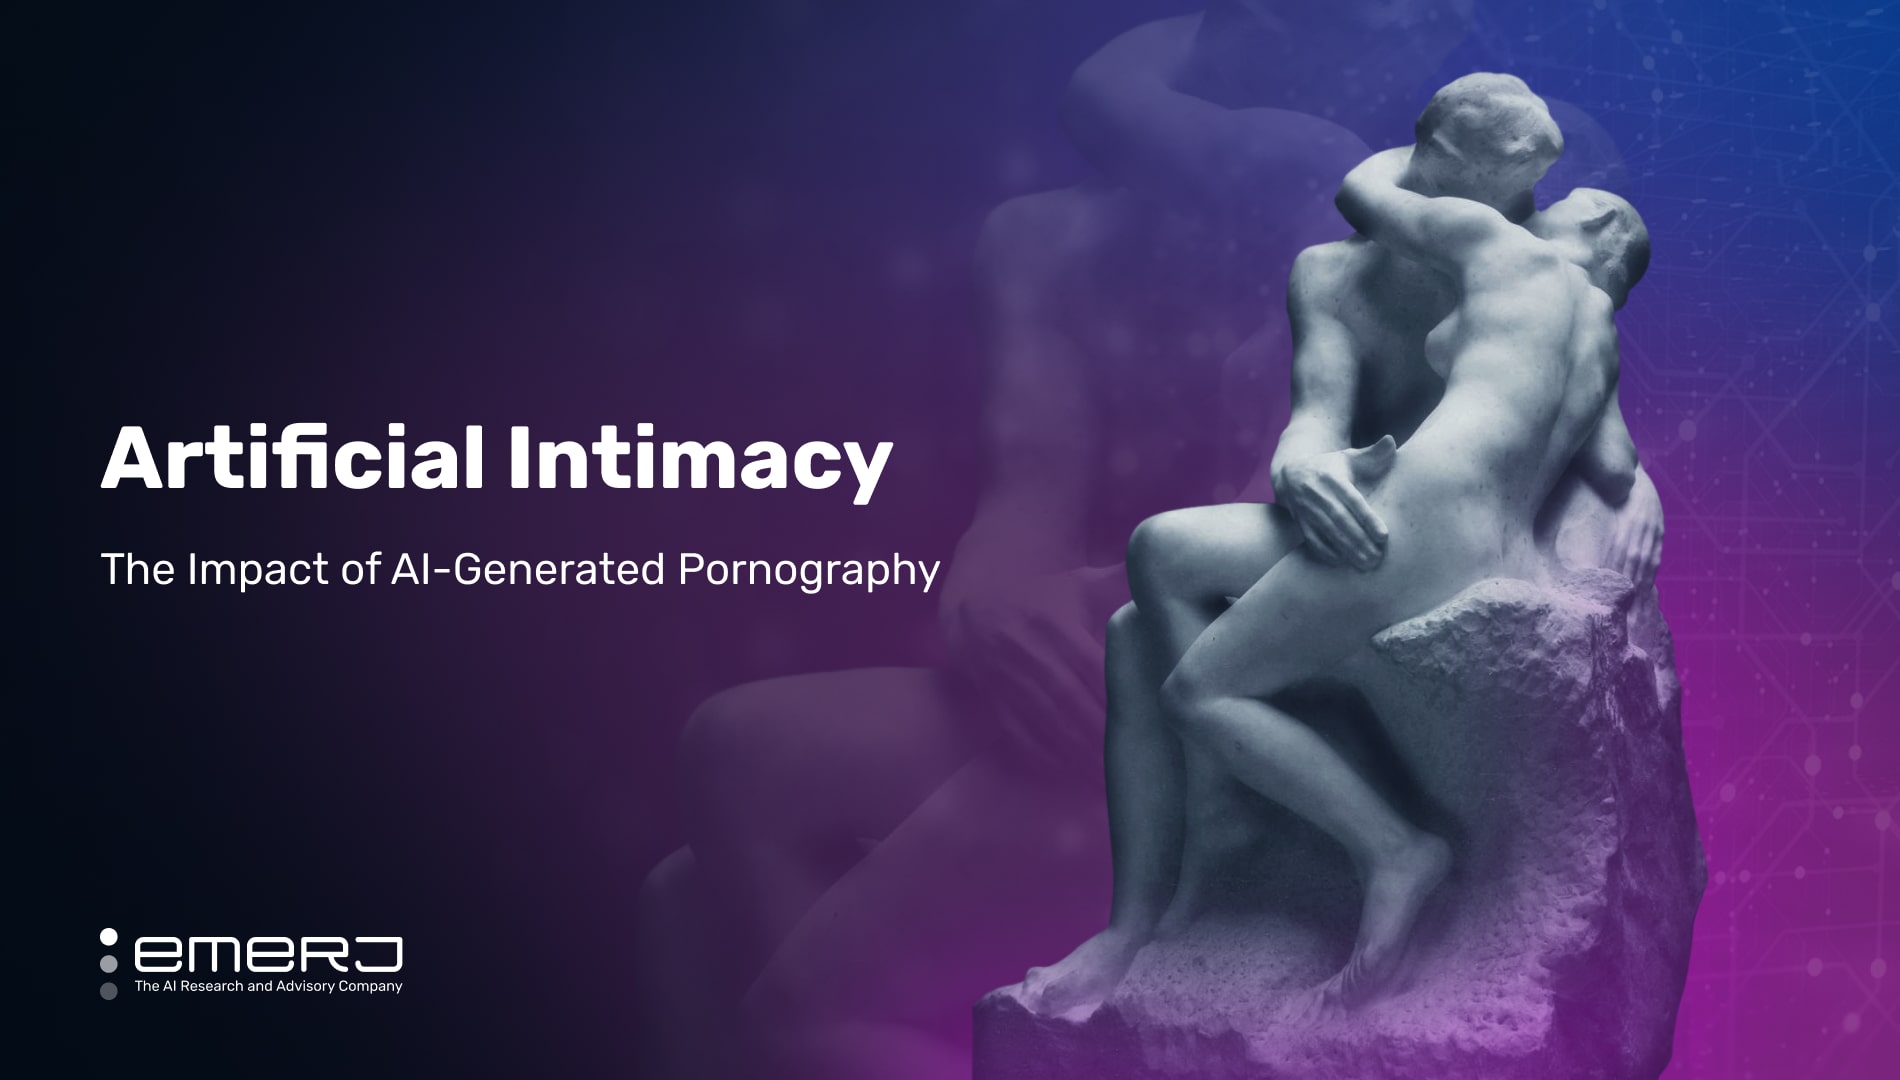 Pornografy - Artificial Intimacy: How AI-Generated Pornography is Changing Society |  Emerj Artificial Intelligence Research